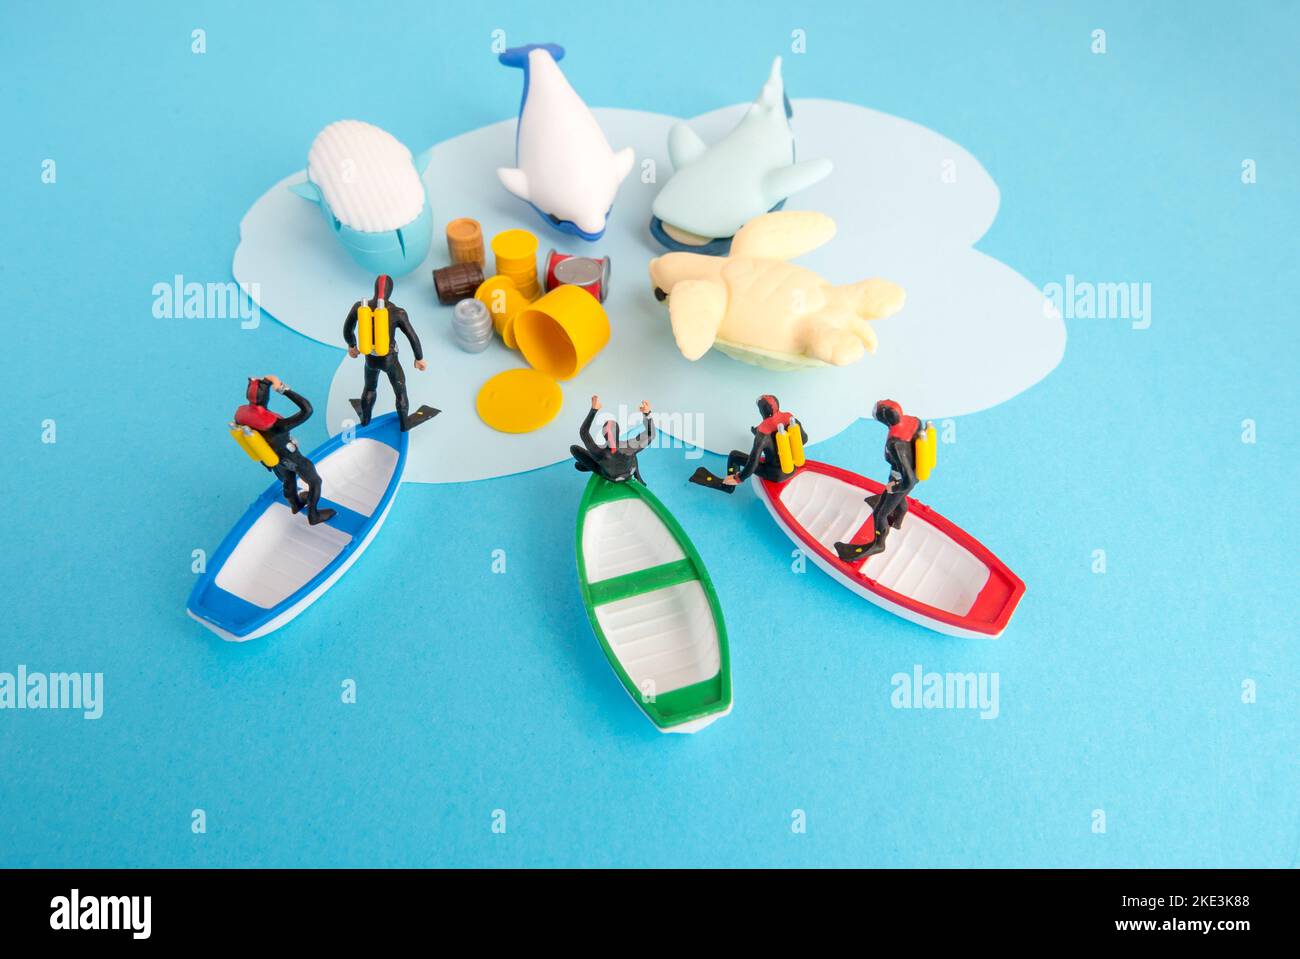 Miniature toys -  Top view toxic waste dumped to the sea, resulted in marine life destruction and ocean pollution concept. Stock Photo